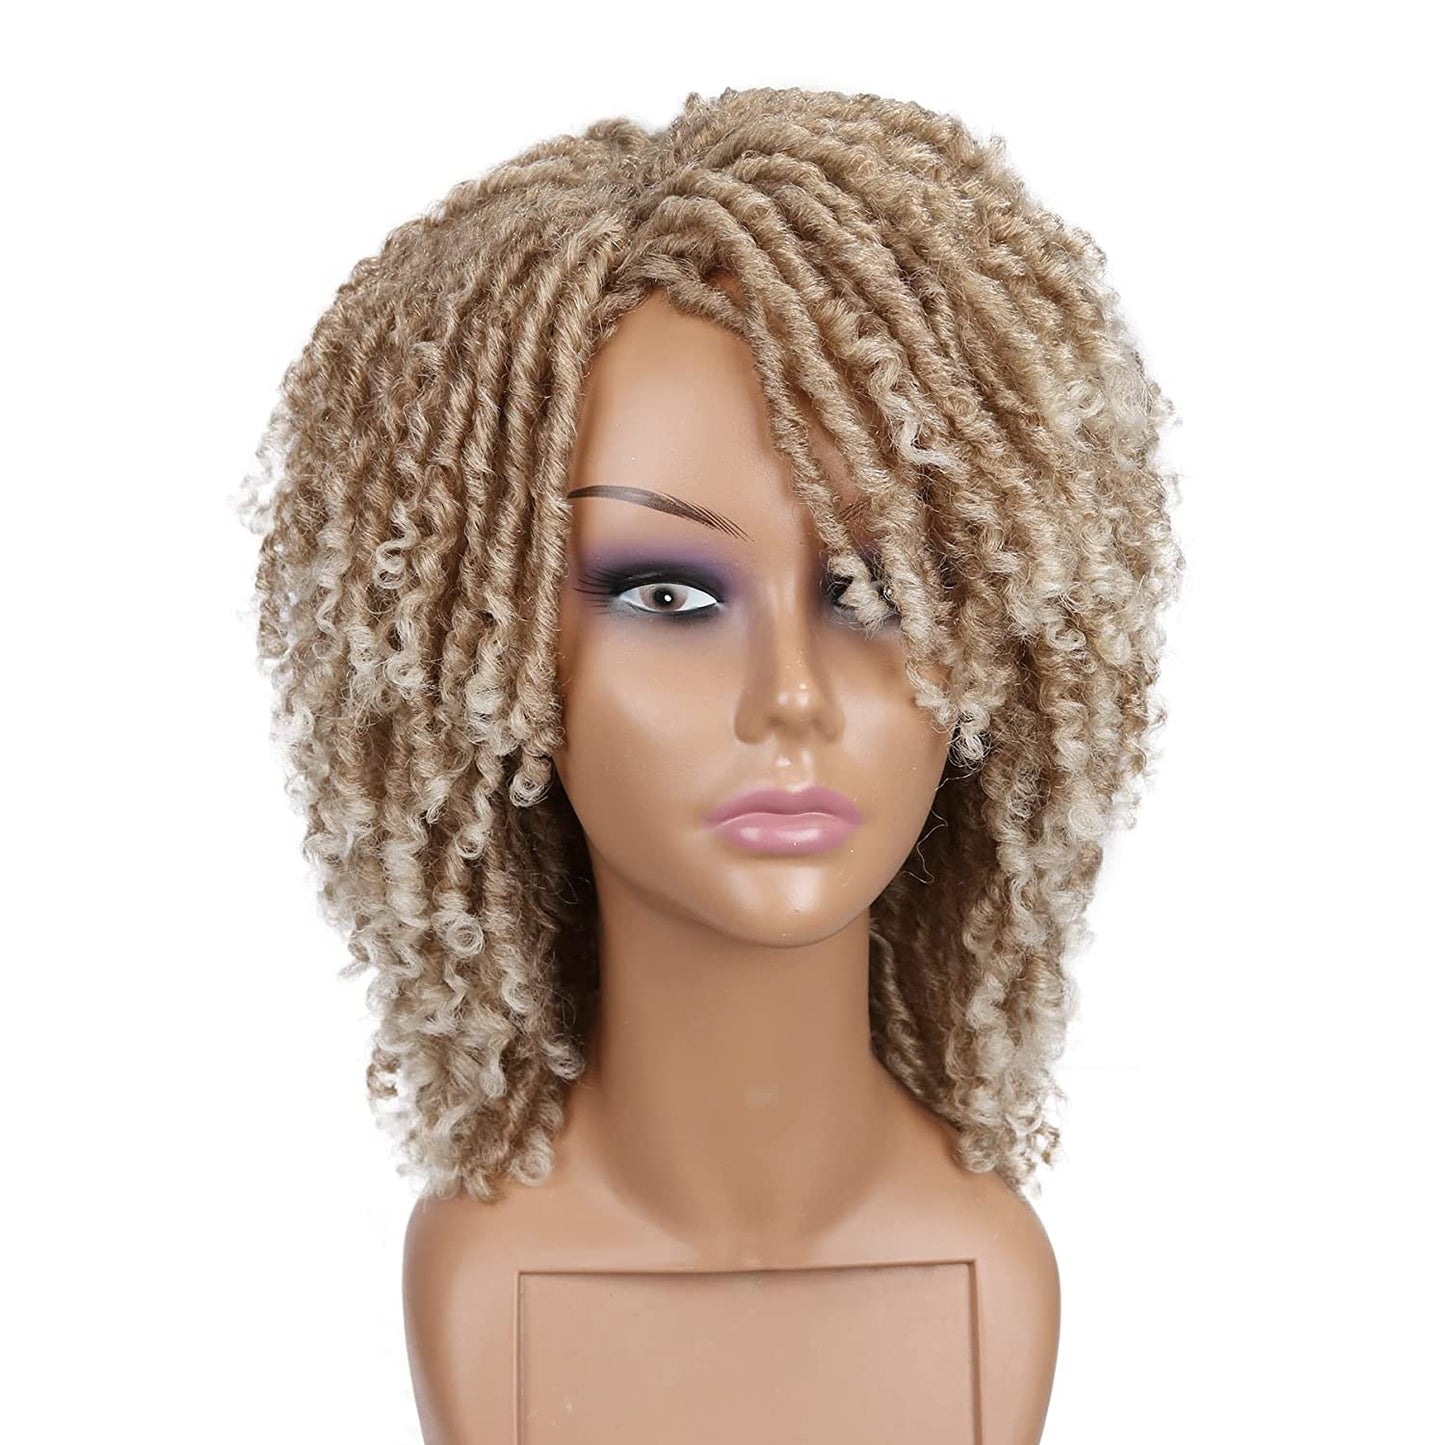 blonde wig,wigs for black women,dreadlocks wig, Our Dreadlock Wig Short Twist Wig is perfect for a natural, stylish look. This lightweight wig features a beautiful twist style and is made of premium heat resistant synthetic fibers. The breathable cap provides superior comfort and an adjustable strap ensures a secure fit. Our Dreadlock Wig Short Twist Wig is perfect for any occasion.